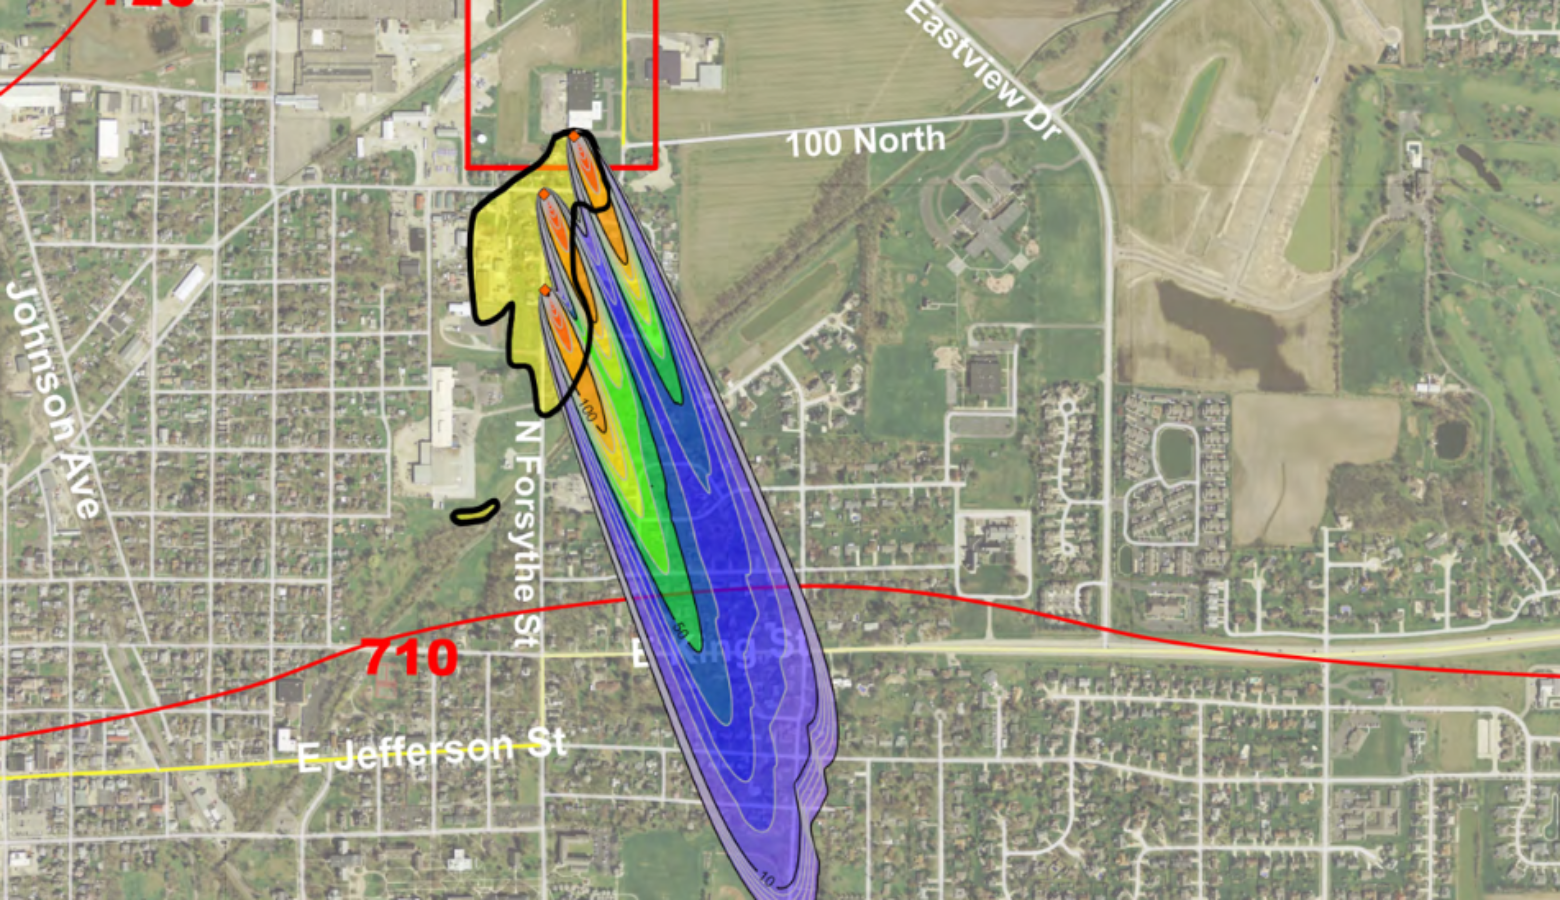 This model estimates water contamination from the Amphenol site (red outline) could have spread farther than the EPA's groundwater study area (yellow). Warmer colors show higher possible levels of the cancer-causing chemical TCE. (Courtesy of Mundell)